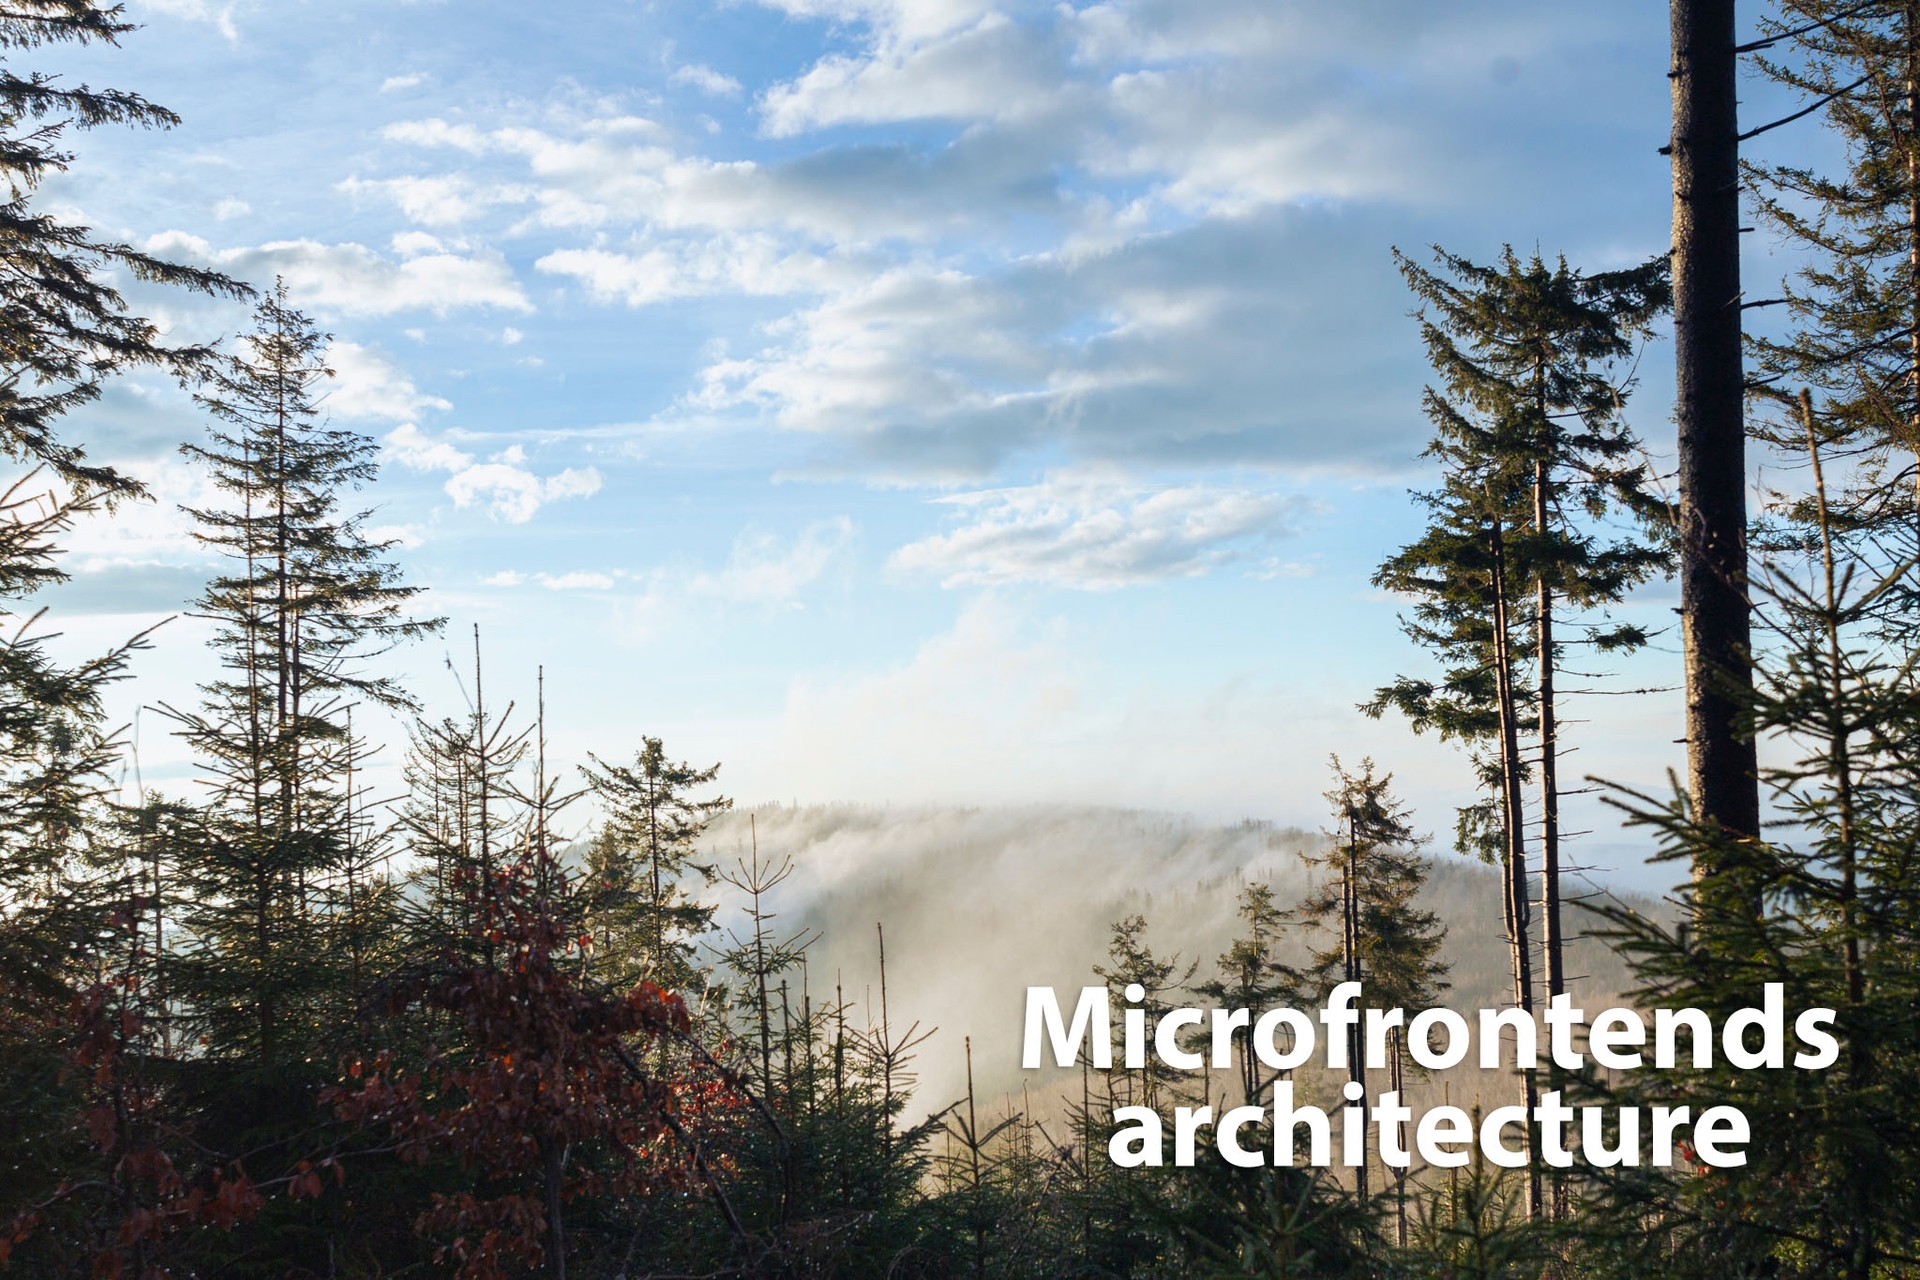 Exploring microfrontends - advantages and drawbacks